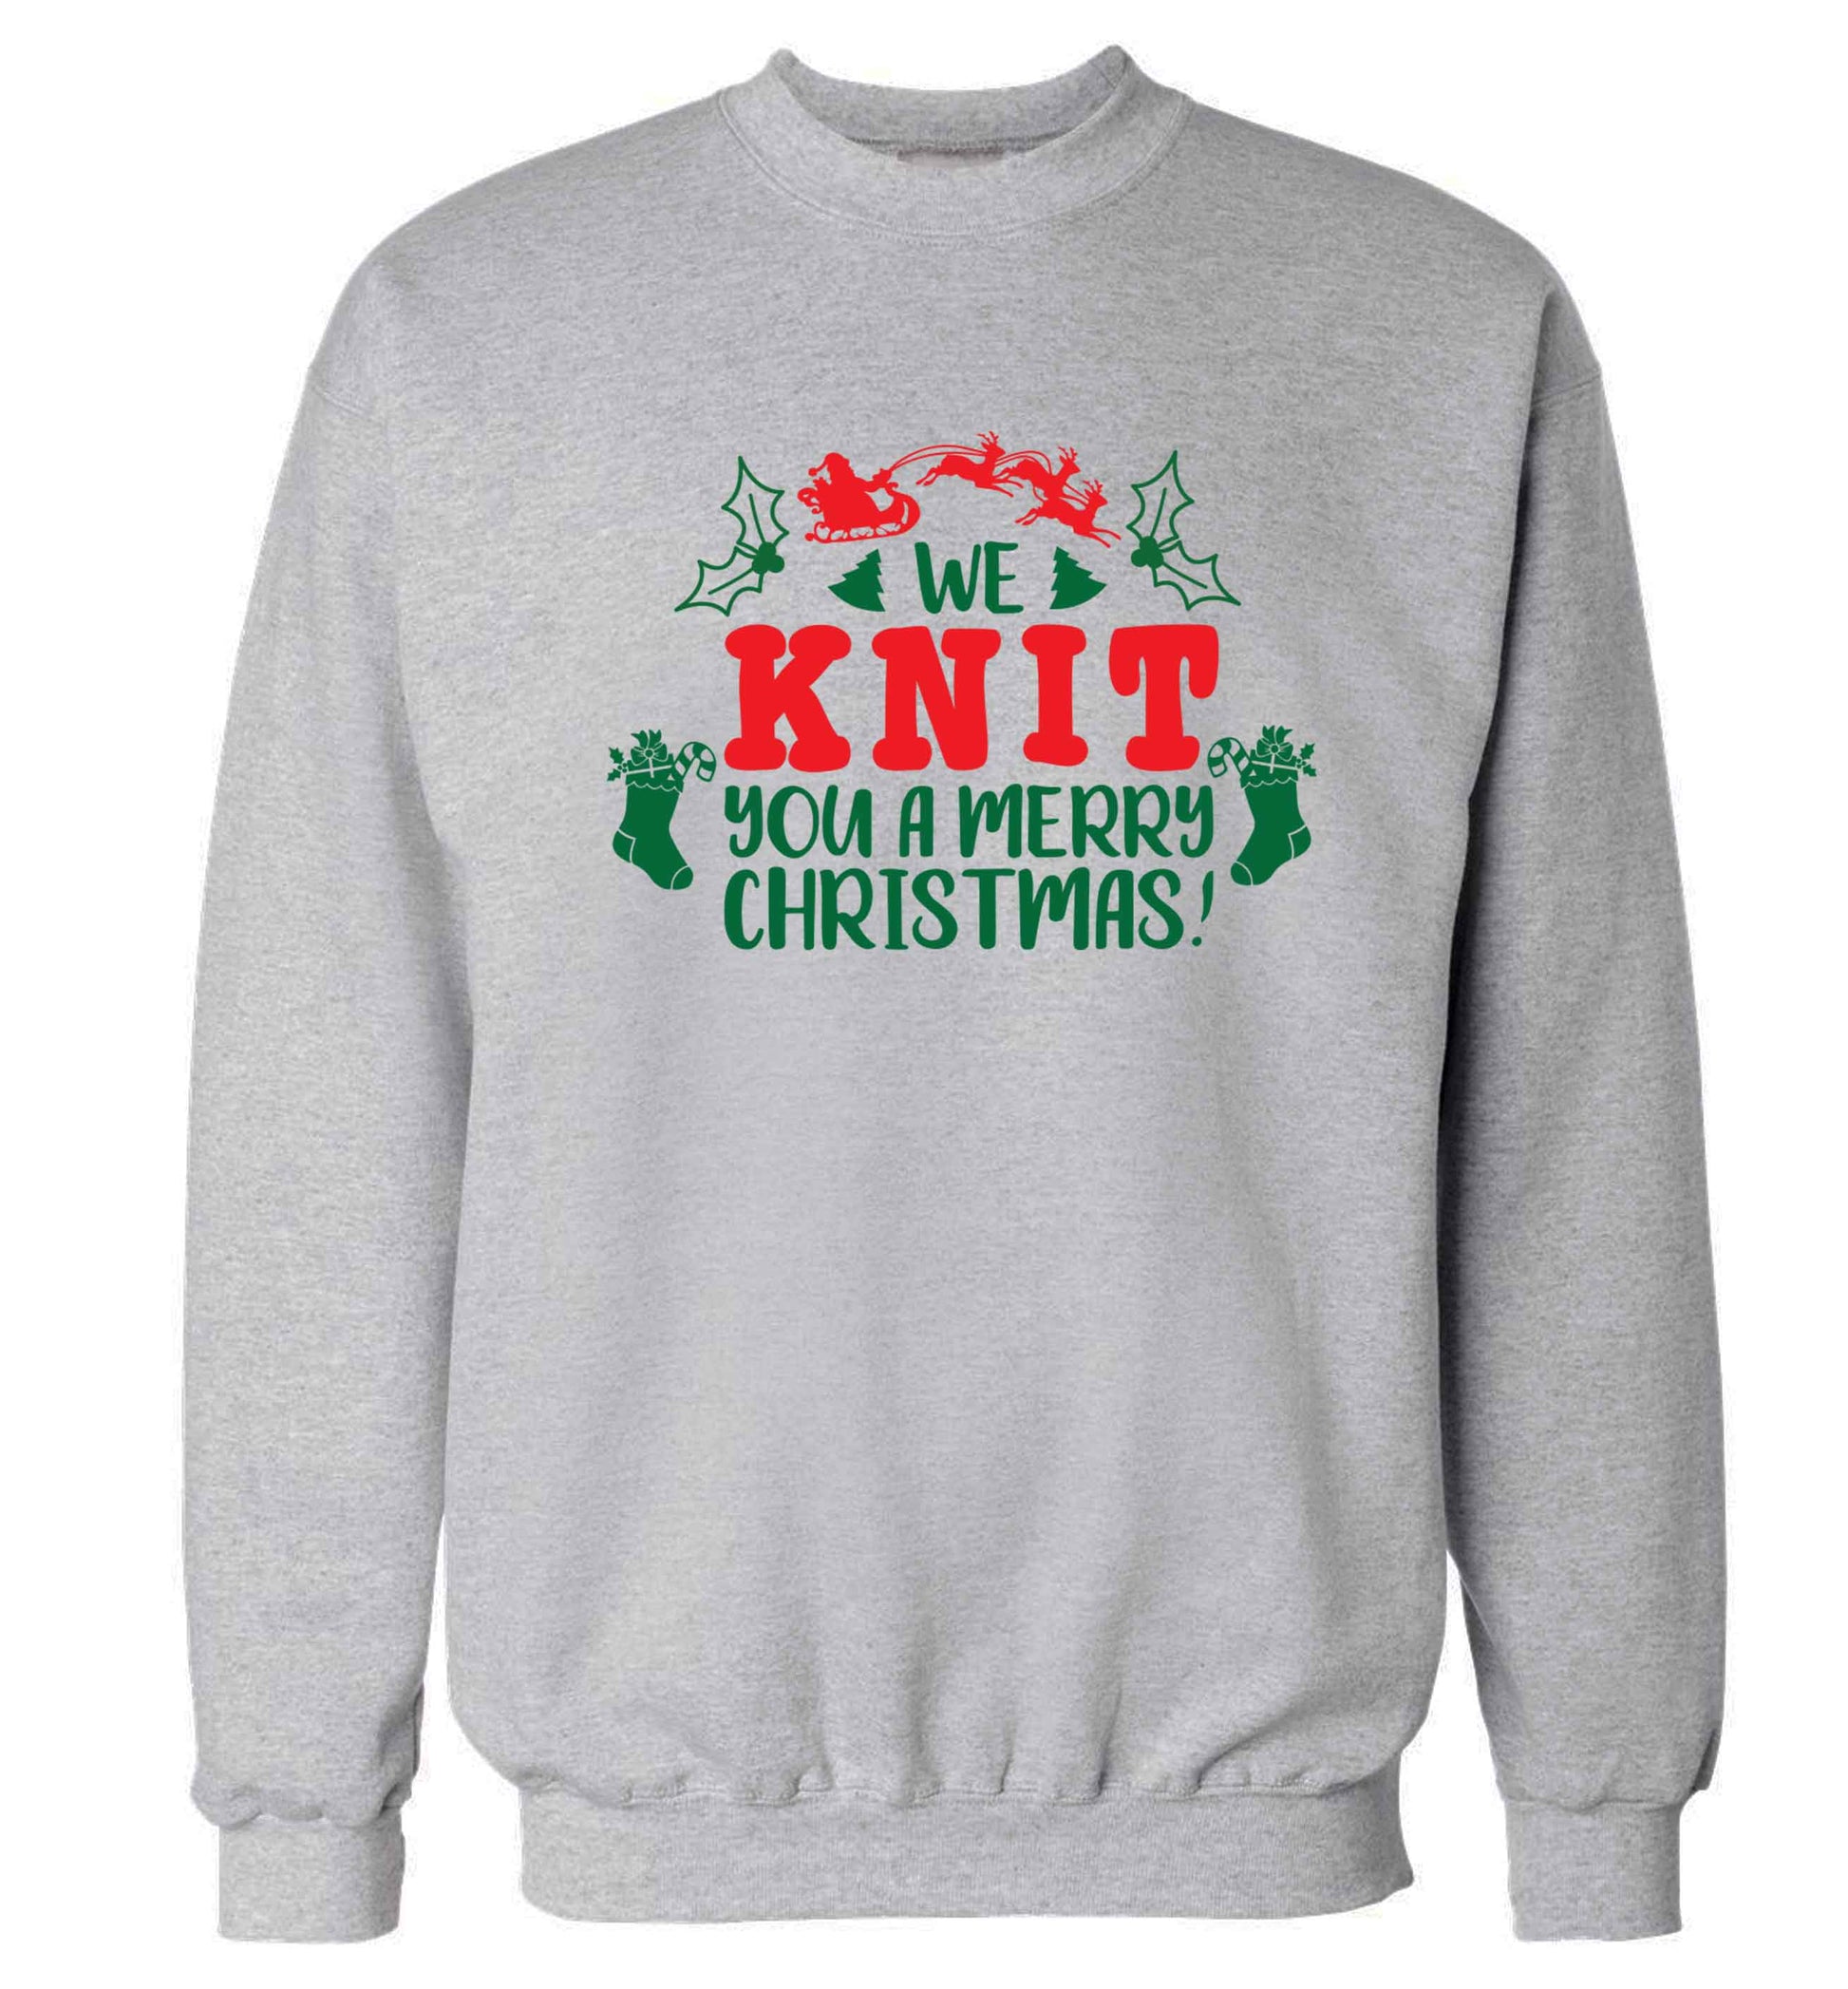 We knit you a merry Christmas Adult's unisex grey Sweater 2XL